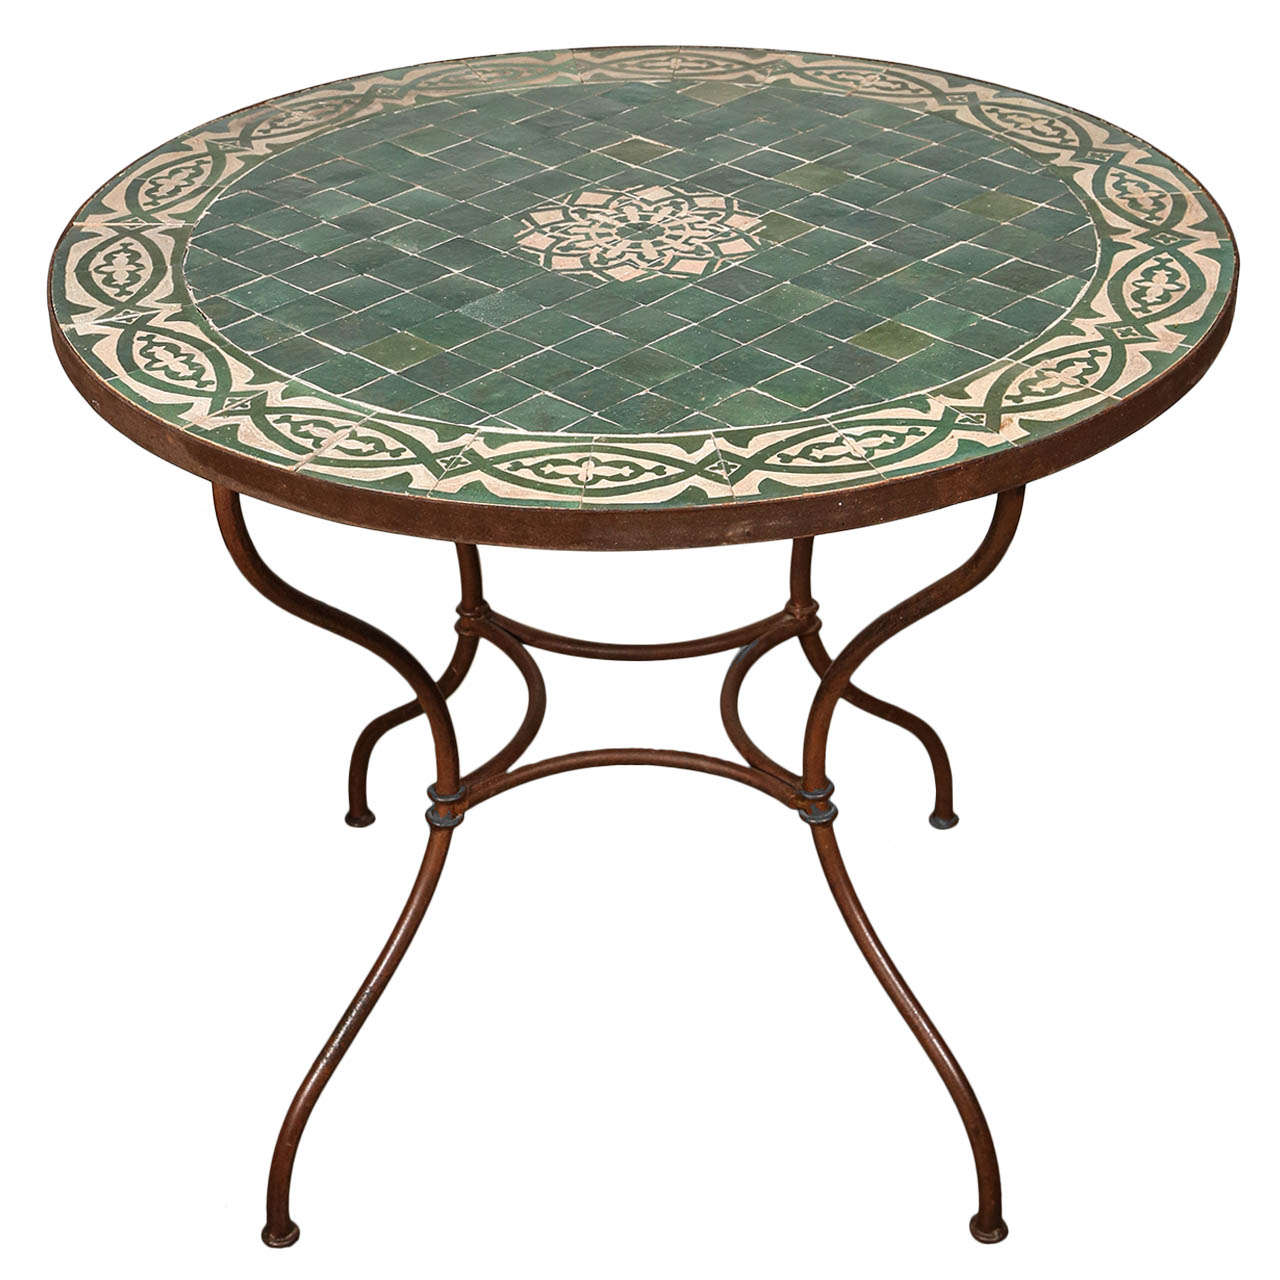 Moroccan Mosaic Tile Table Top